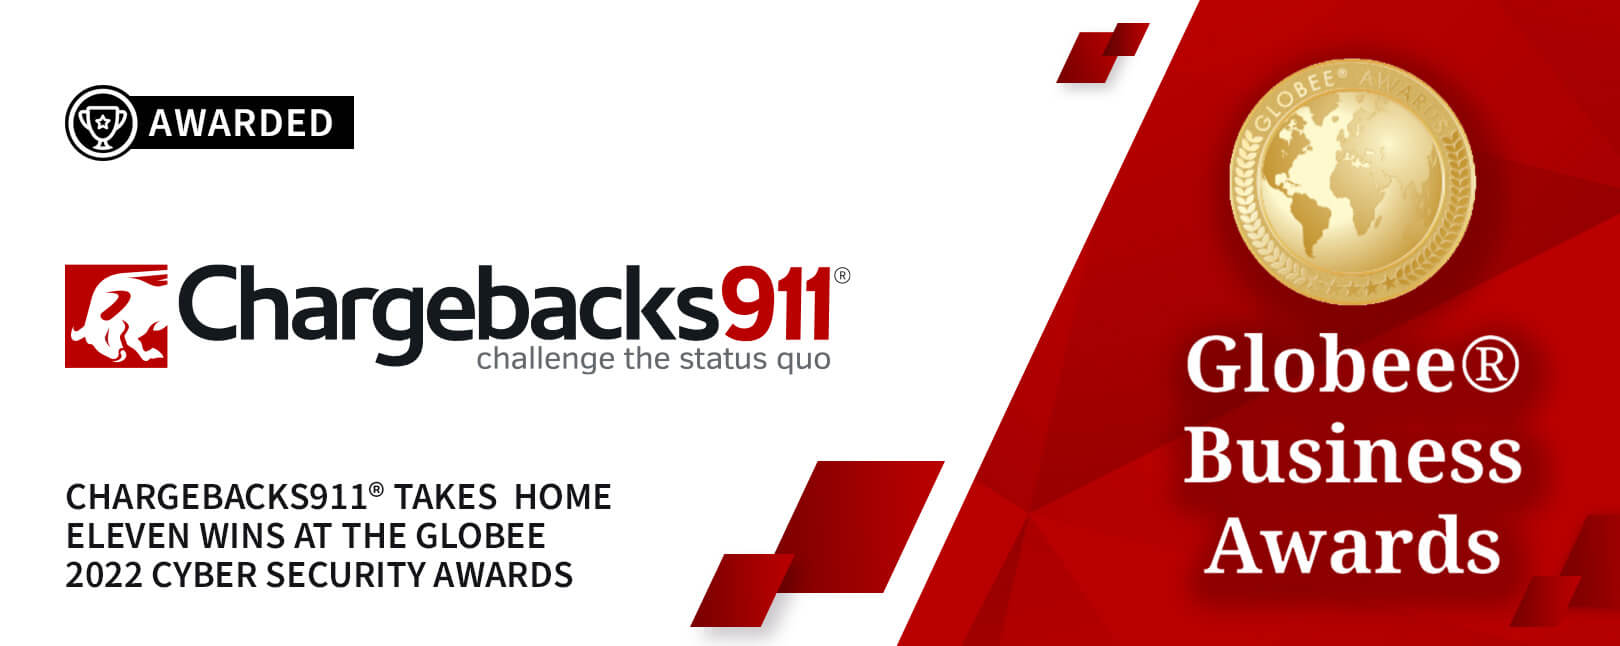 Chargebacks911: The Best ‘Rethinking’ of the Year!